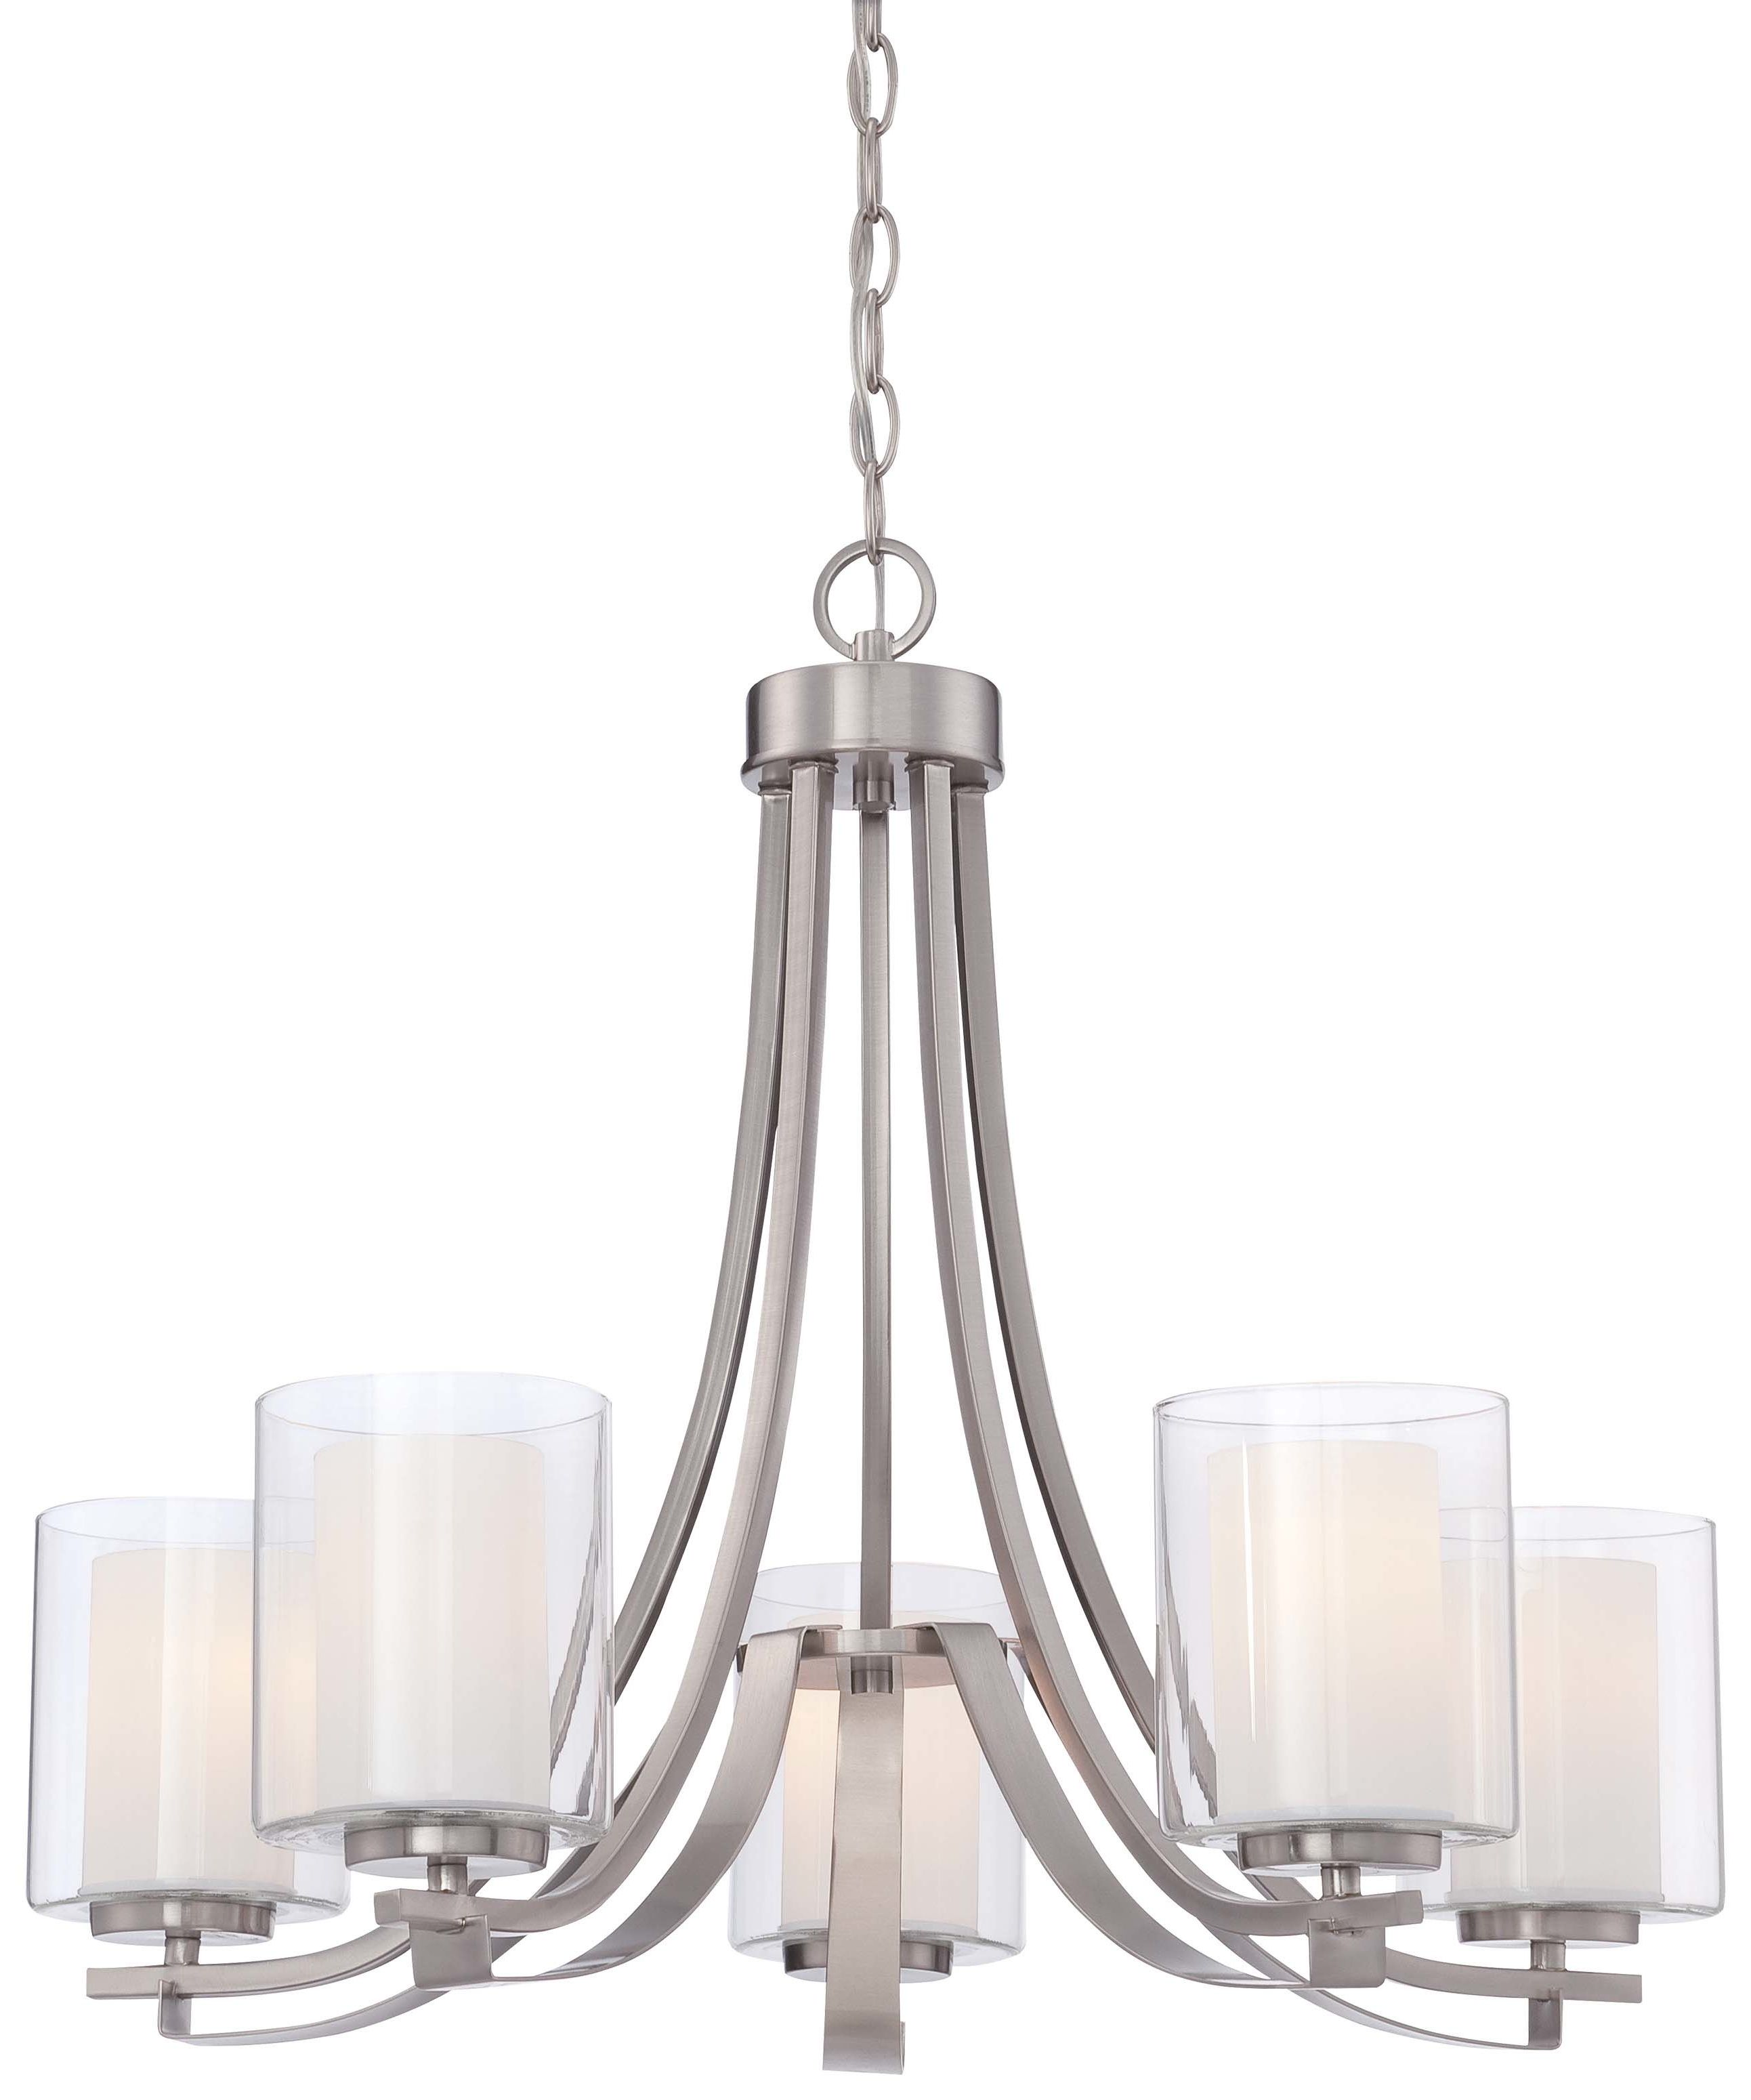 Trendy Demby 5 Light Shaded Chandelier Within Hayden 5 Light Shaded Chandeliers (View 4 of 25)